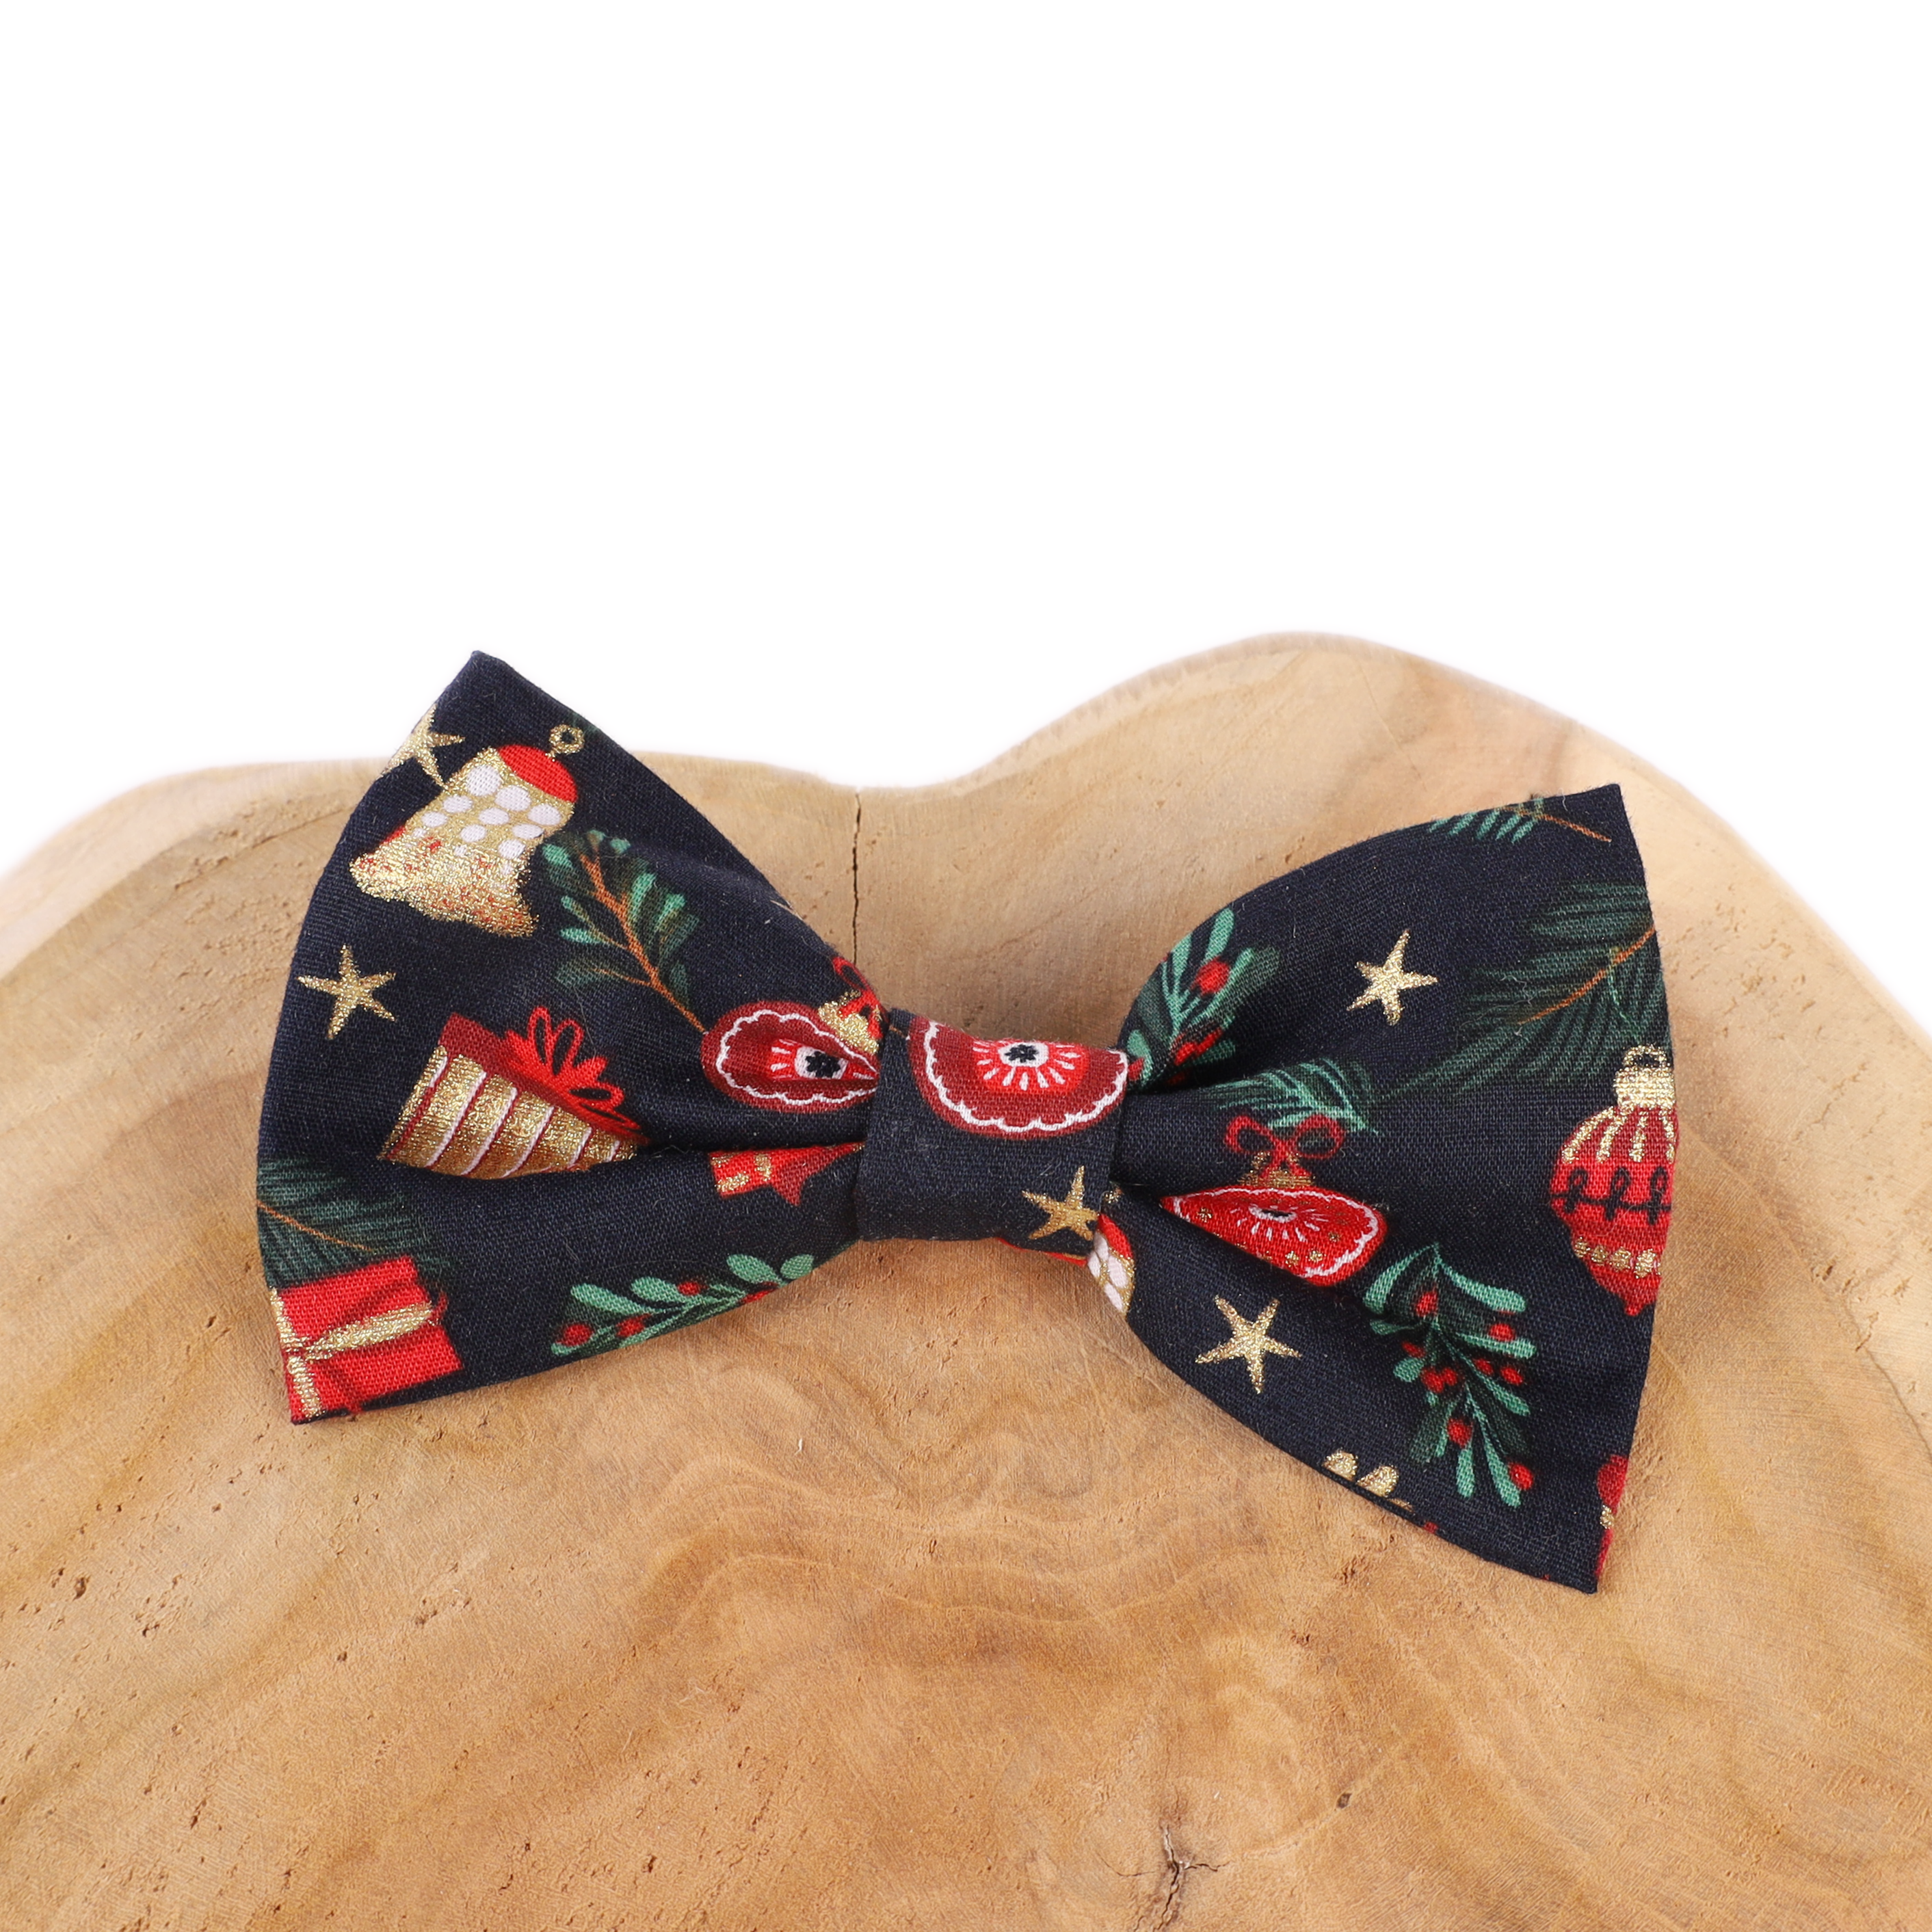 Bow tie - Have a holly jolly Christmas!